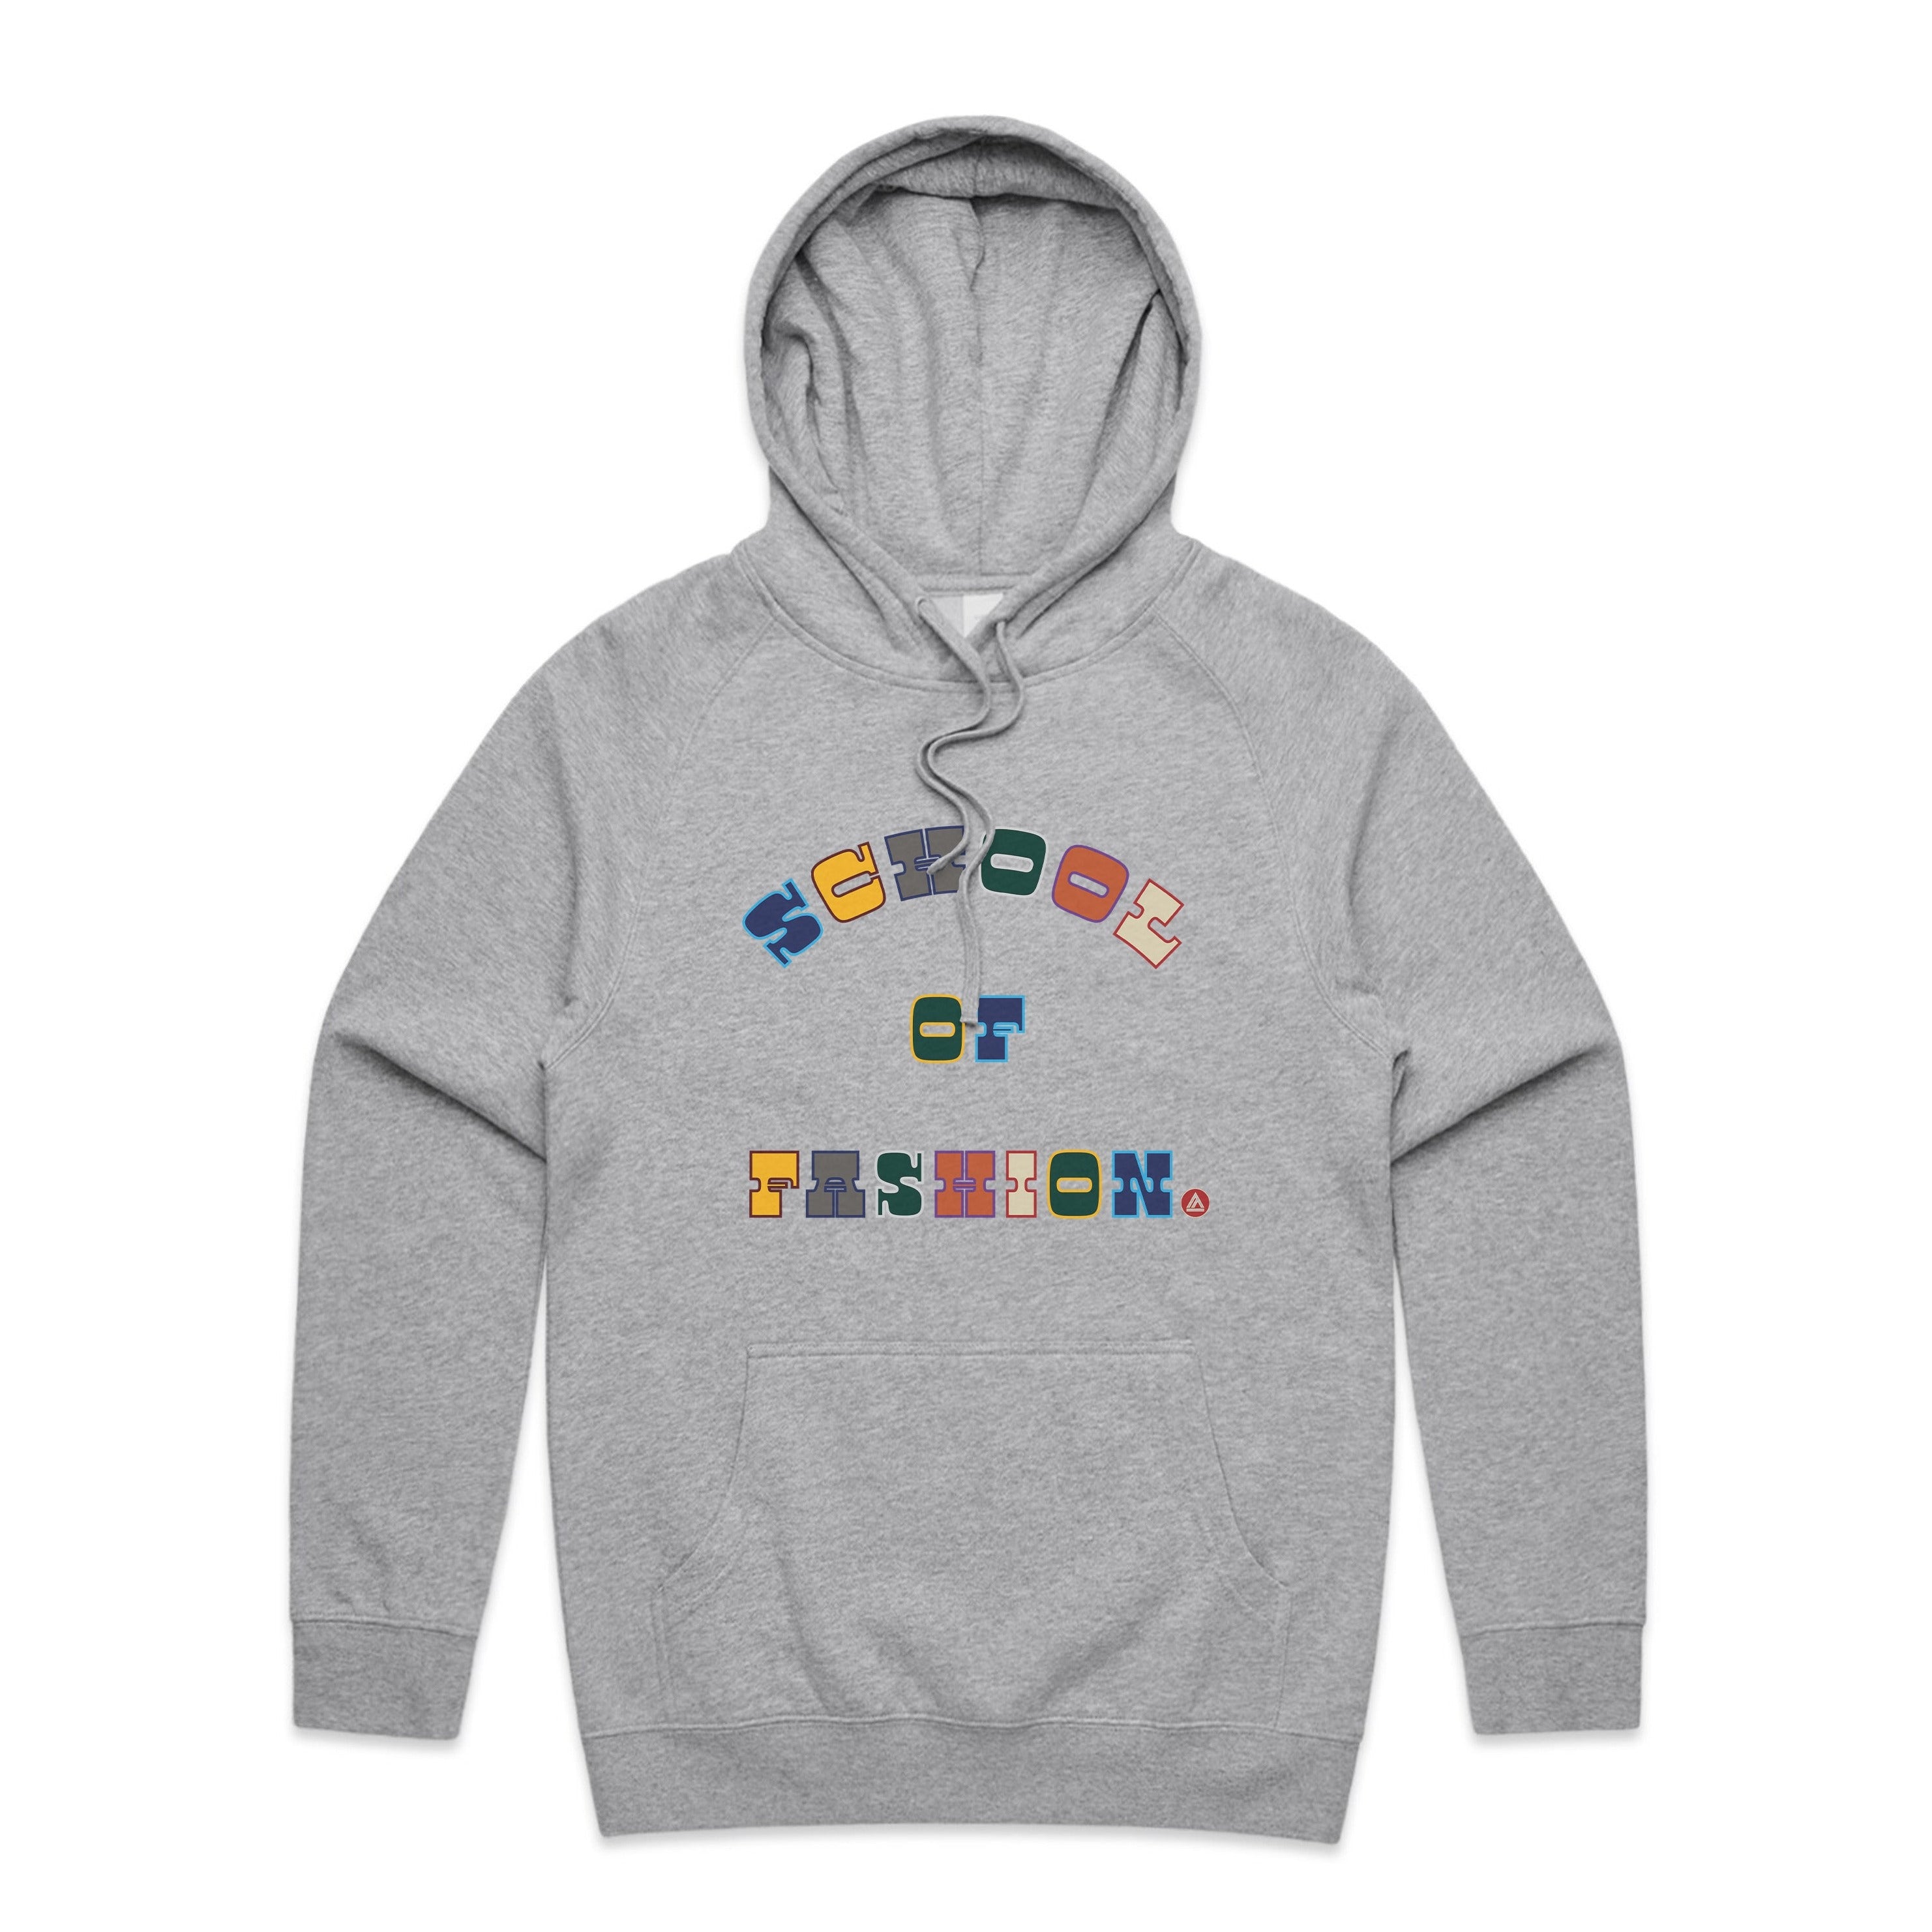 Hoodie "School of Fashion" Colored Font